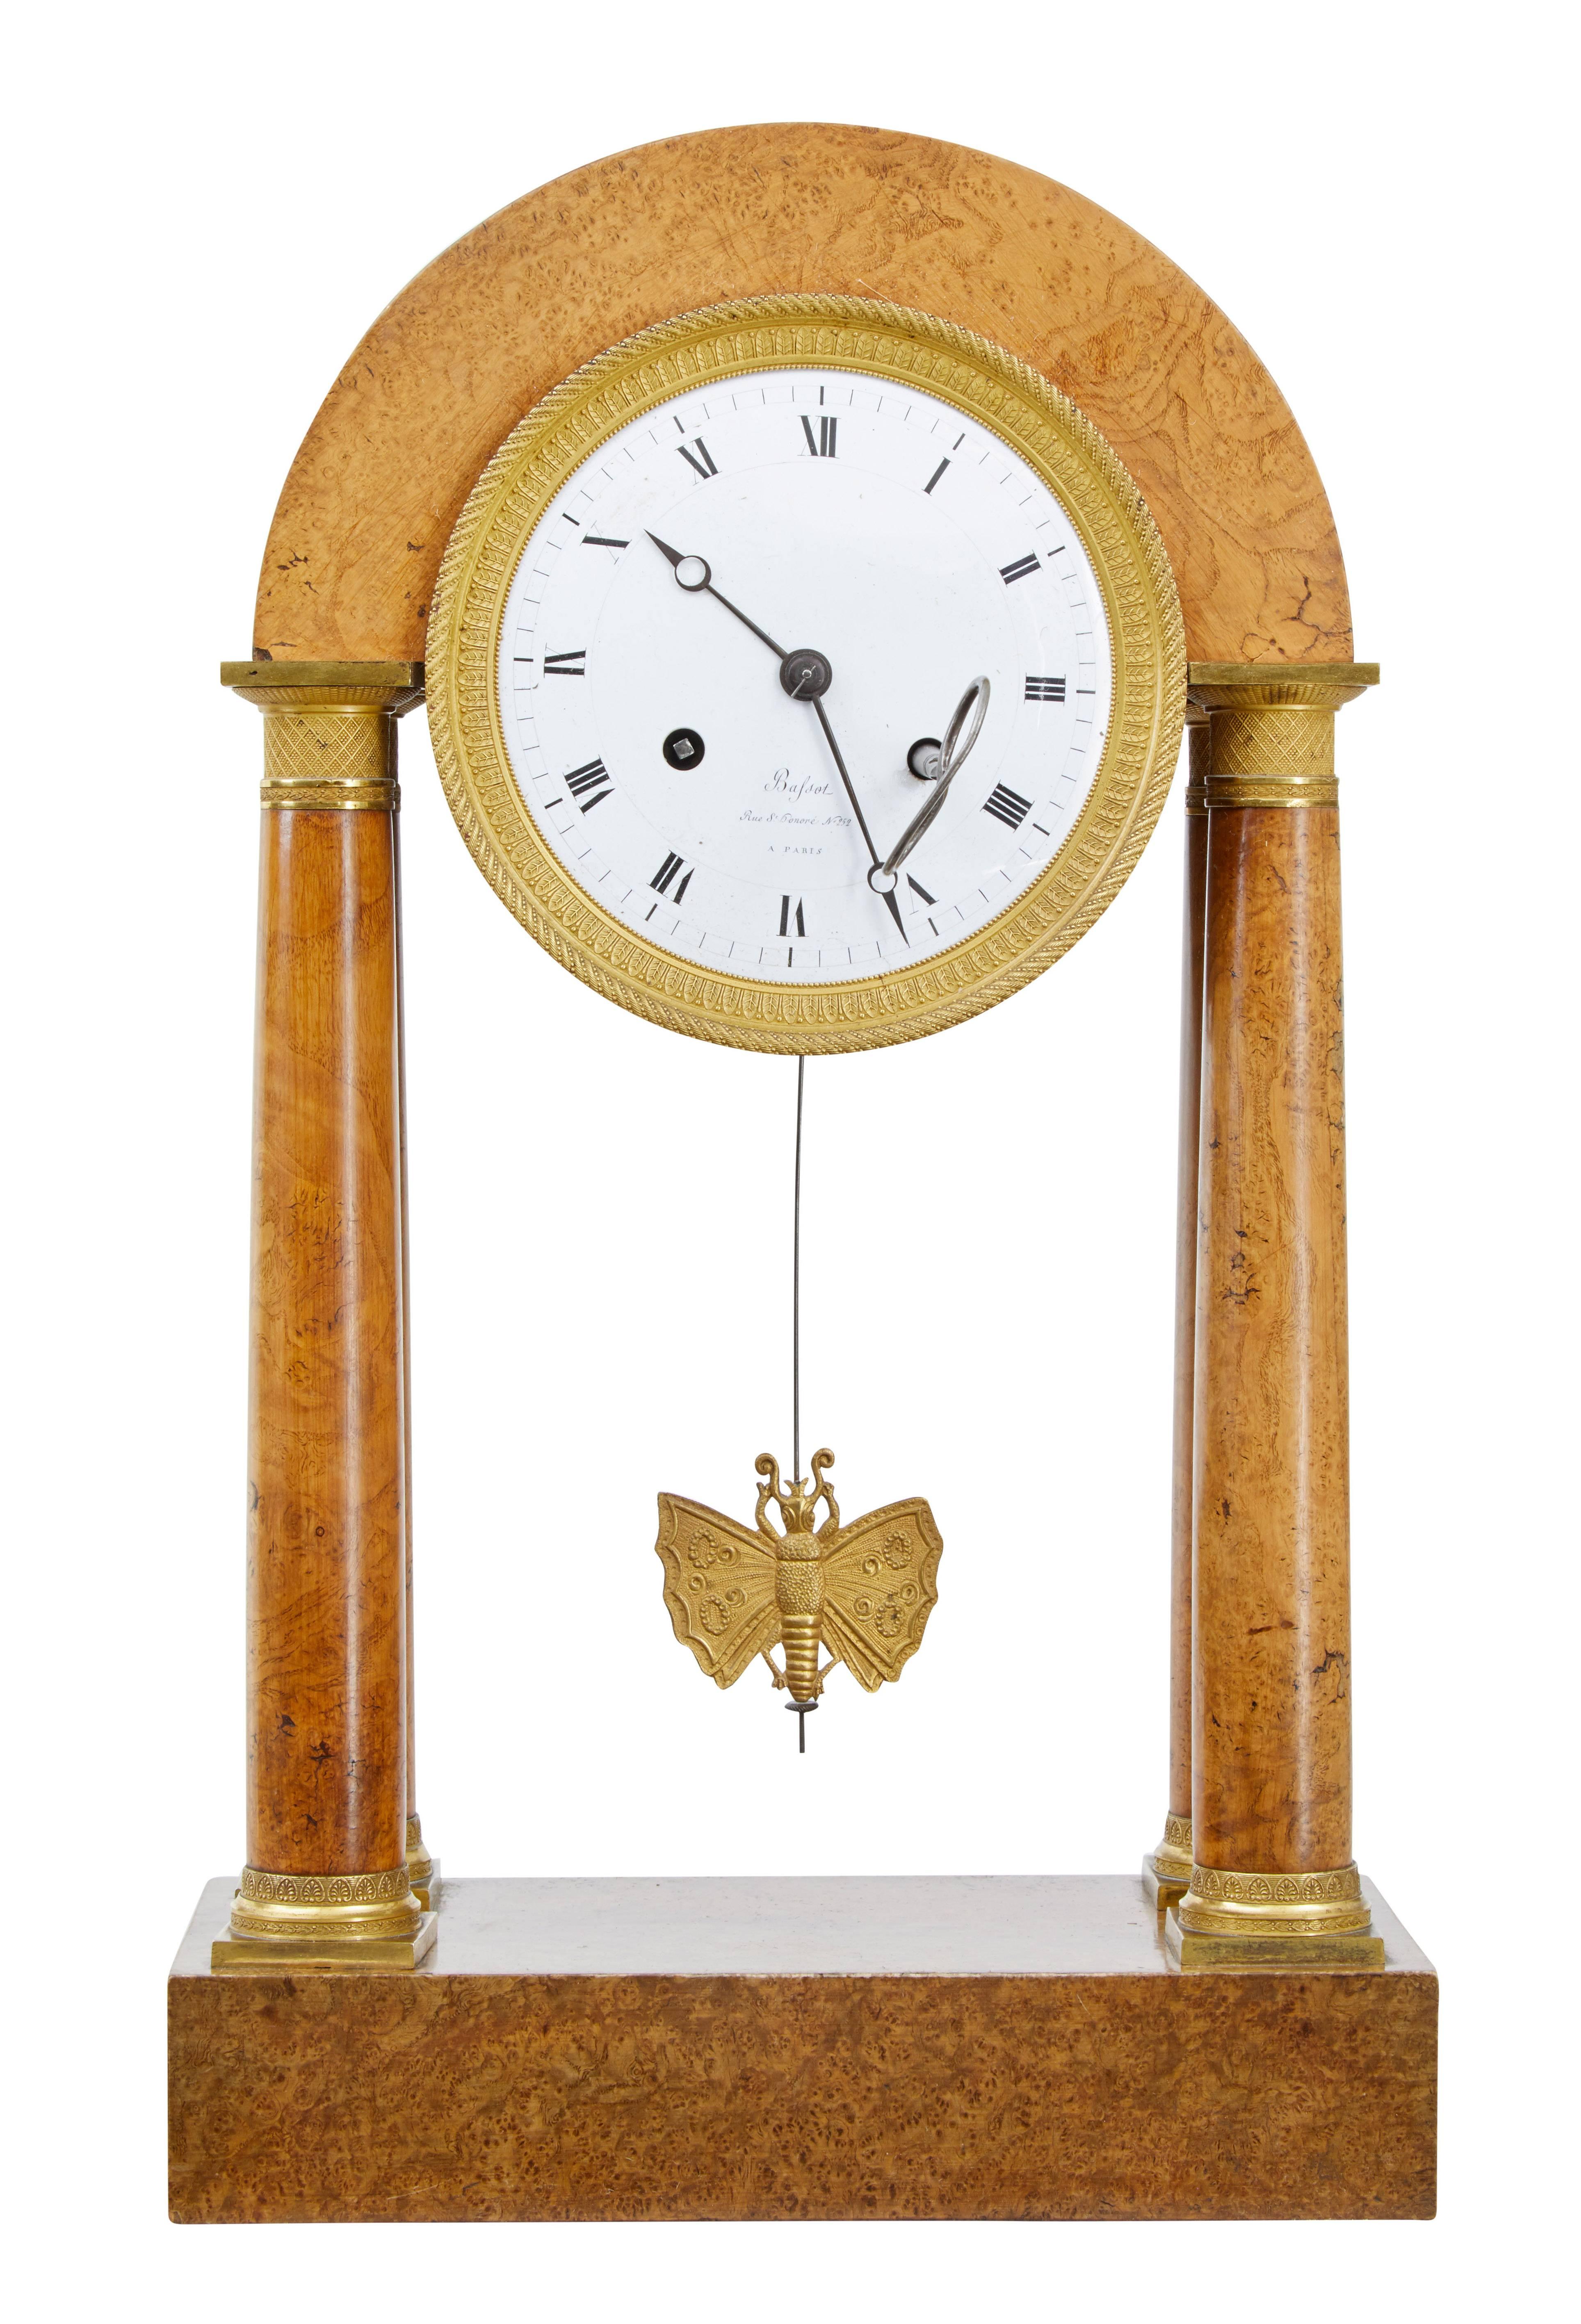 Beautiful piece of French empire design circa 1860.
Clock face with makers mark 'bafsot' rue st honore 252 a Paris.
Movement housed in a dome top, supported by burr columns and ormolu mounts, standing on an elm plinth base.
Butterfly pendulum.